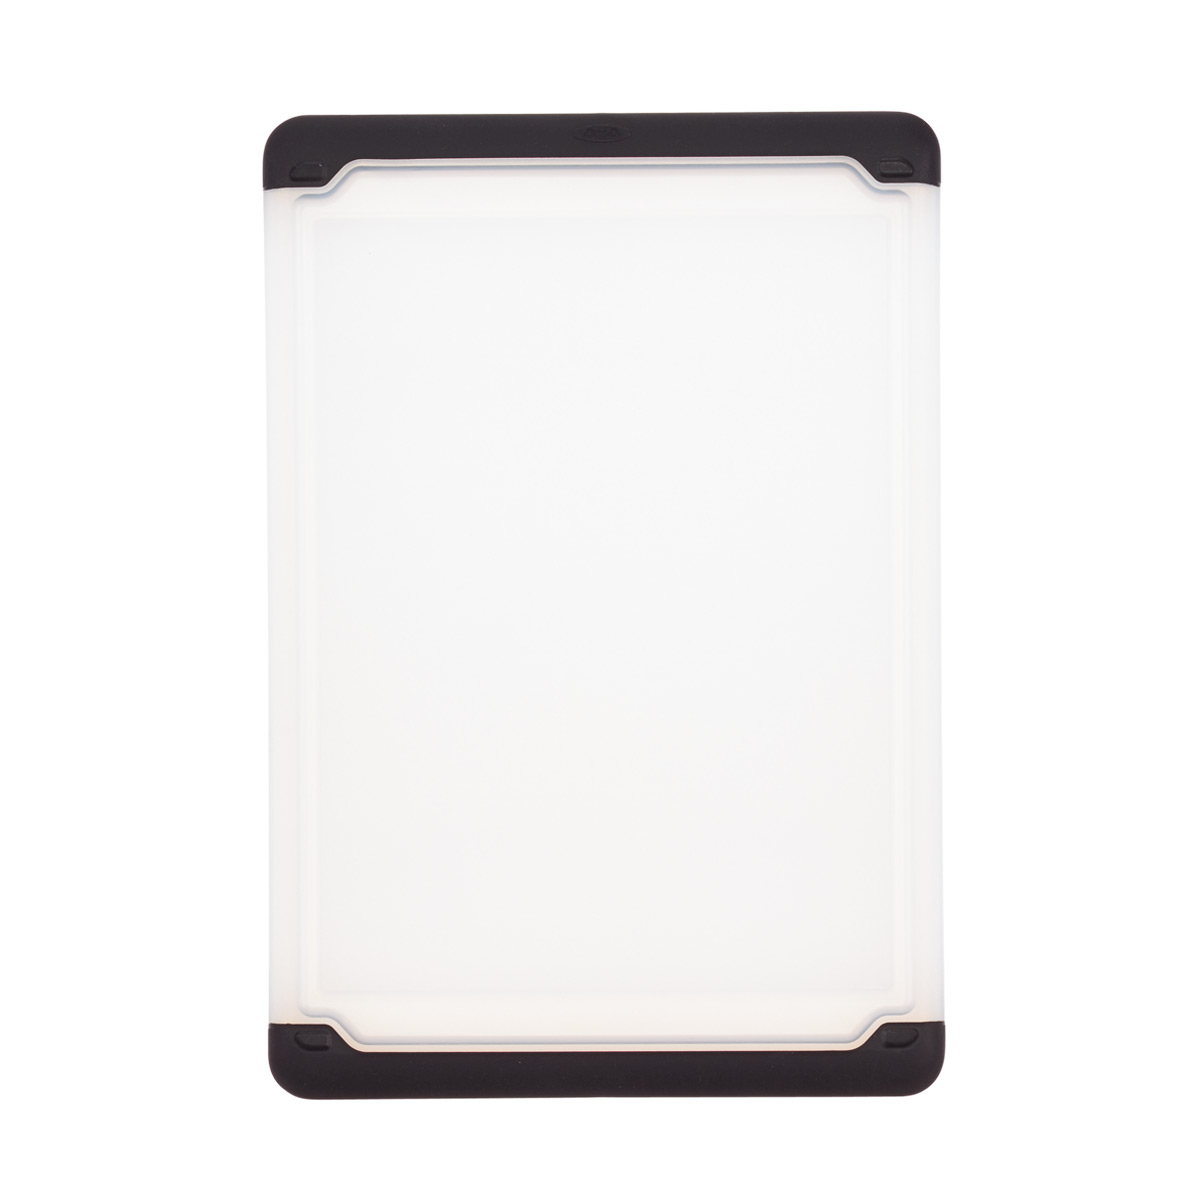 https://www.containerstore.com/catalogimages/330041/10073555-oxo-prep-cutting-board.jpg